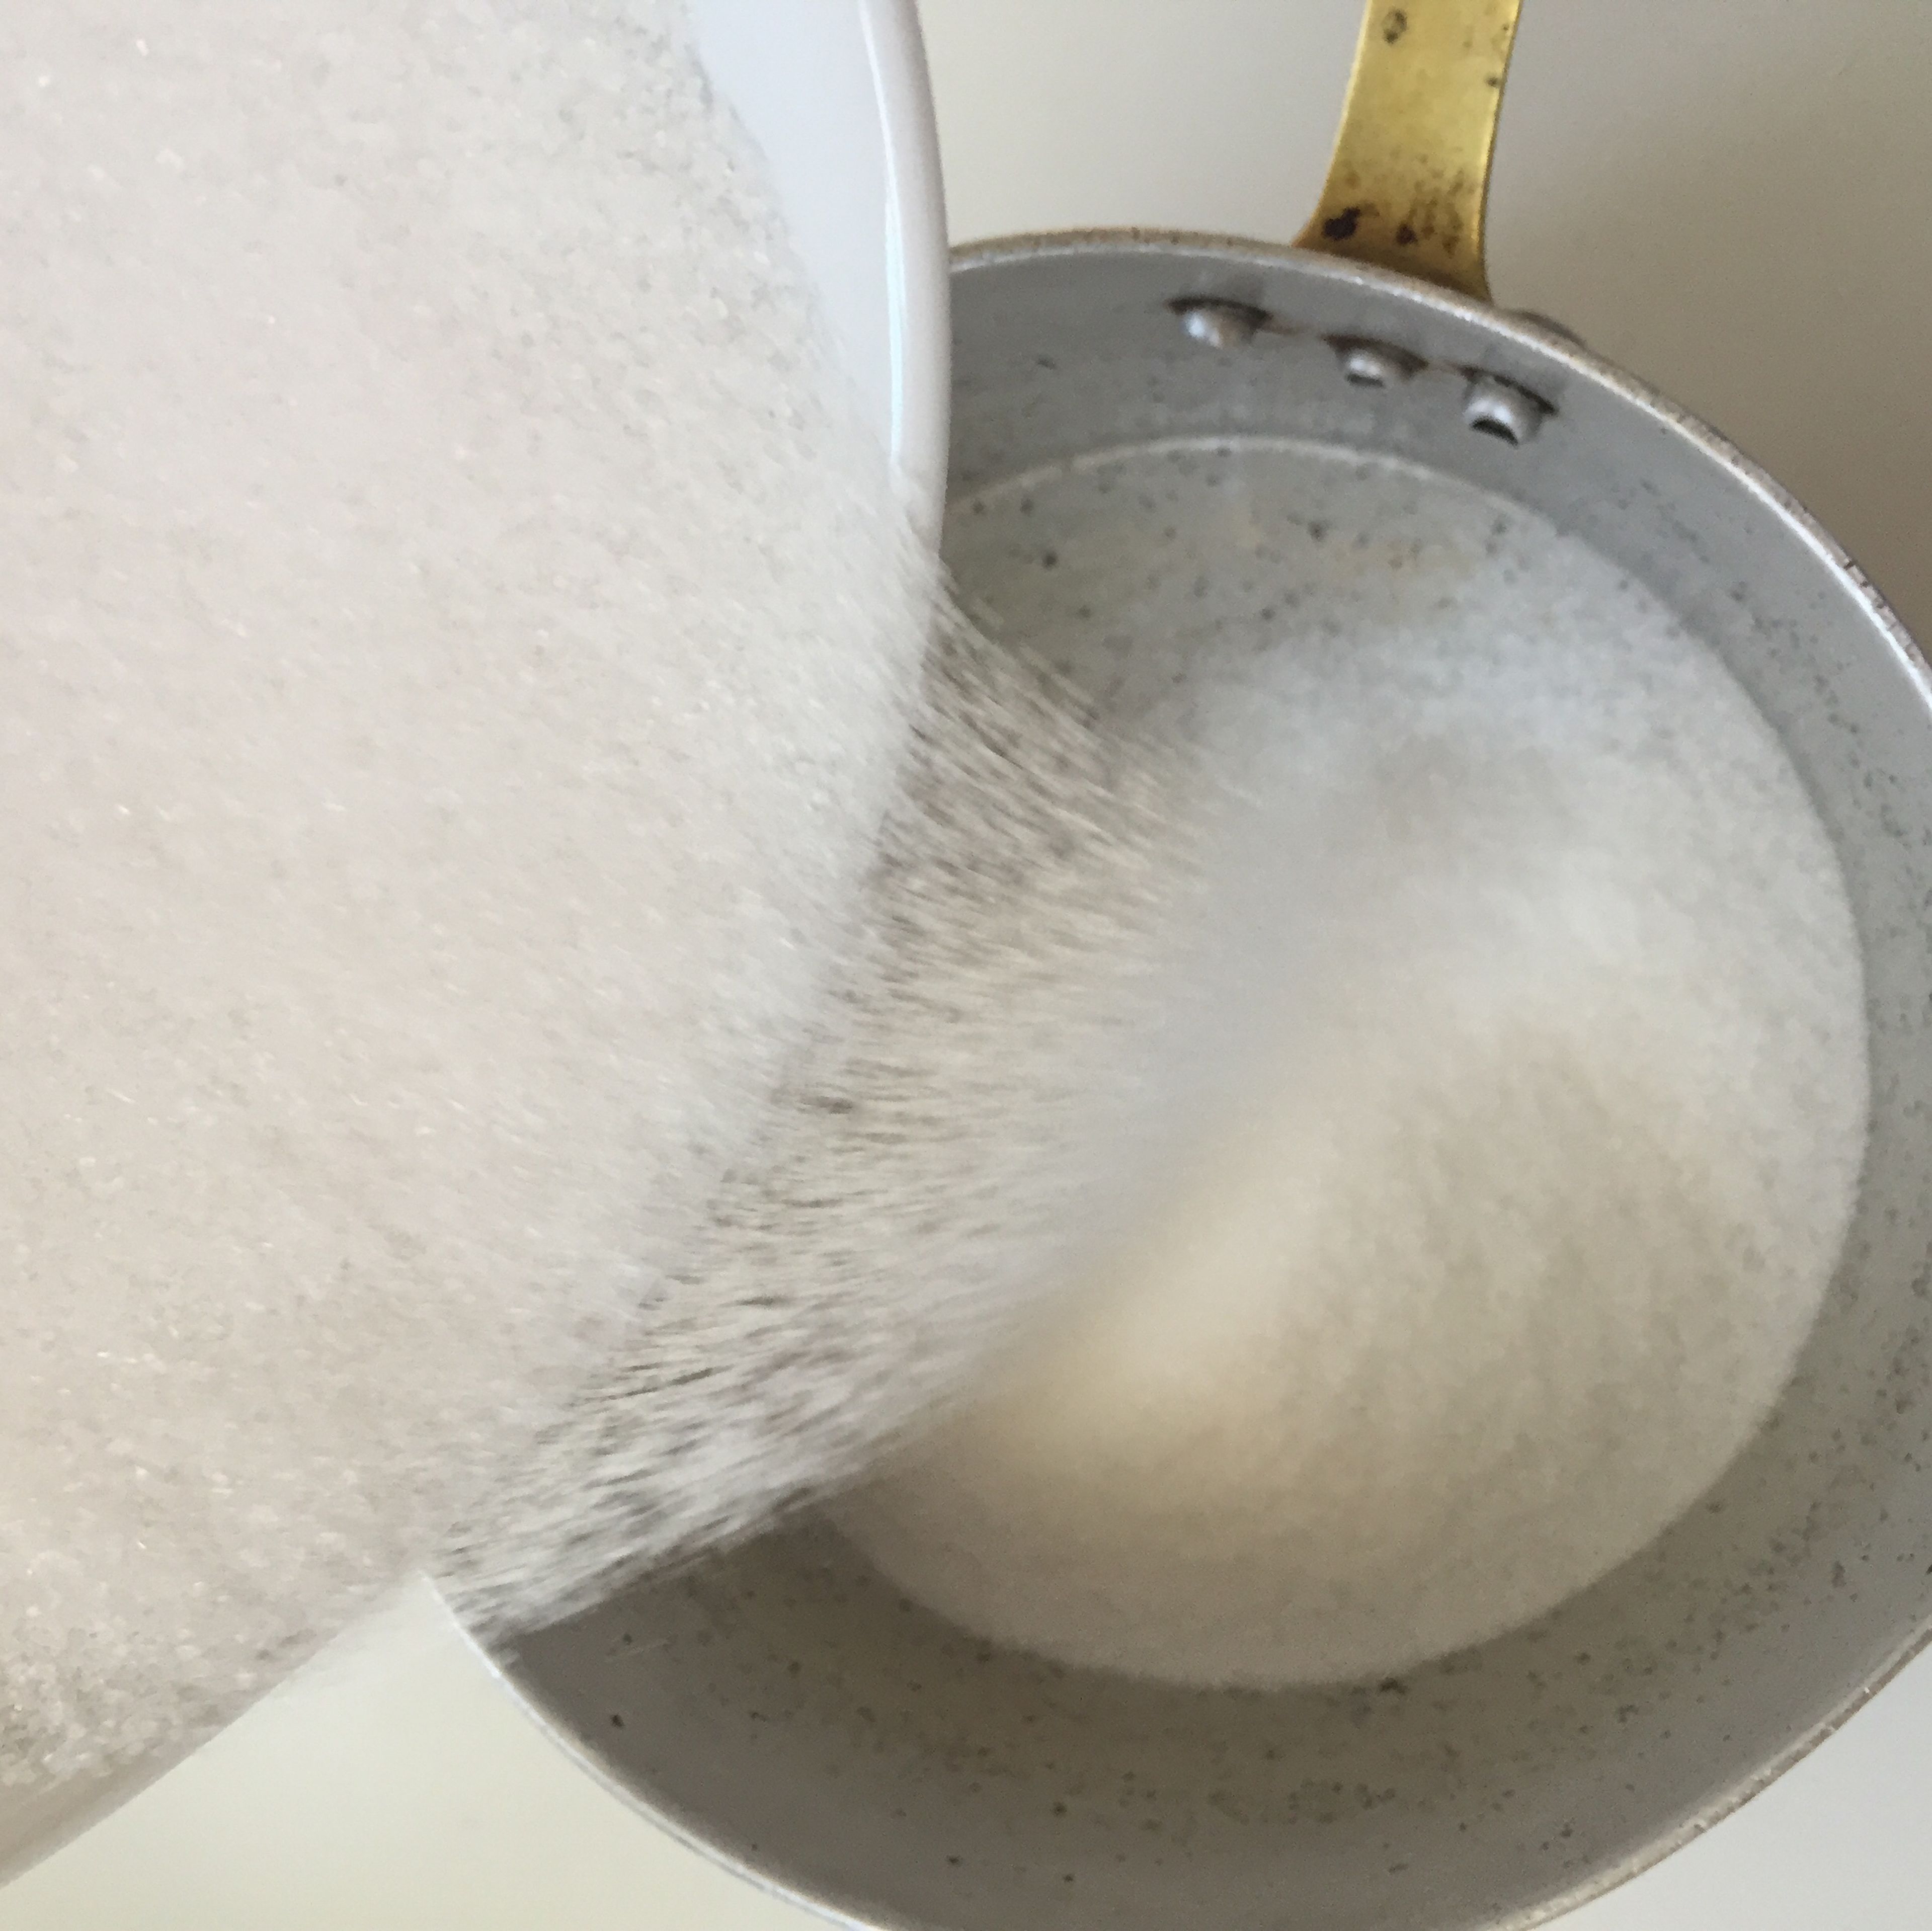 Pour sugar into a small saucepan, and heat over medium-high heat until it melts